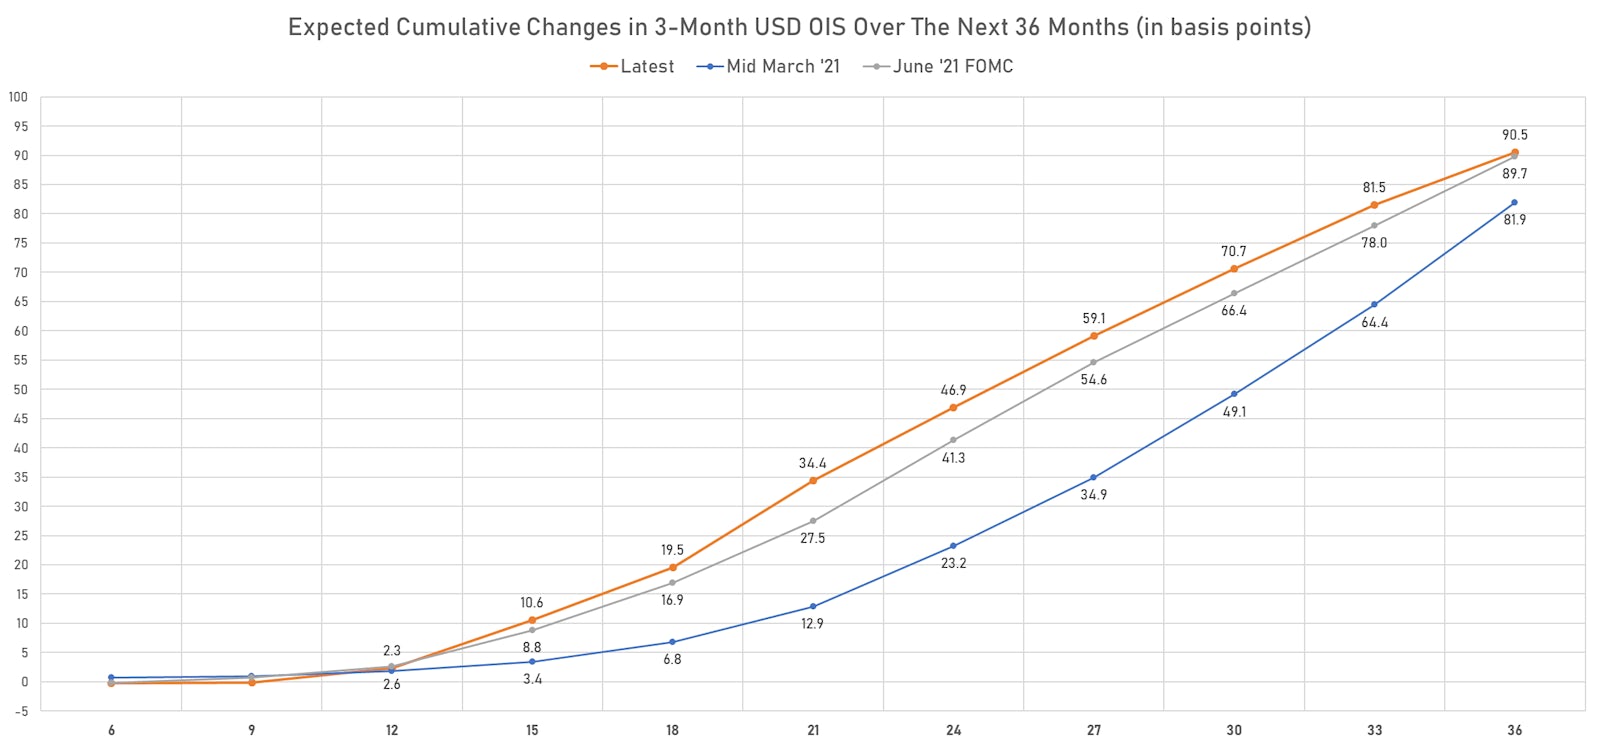 Expected rate hikes derived from the 3m USD OIS Forward Curve | Sources: ϕpost, Refinitiv data